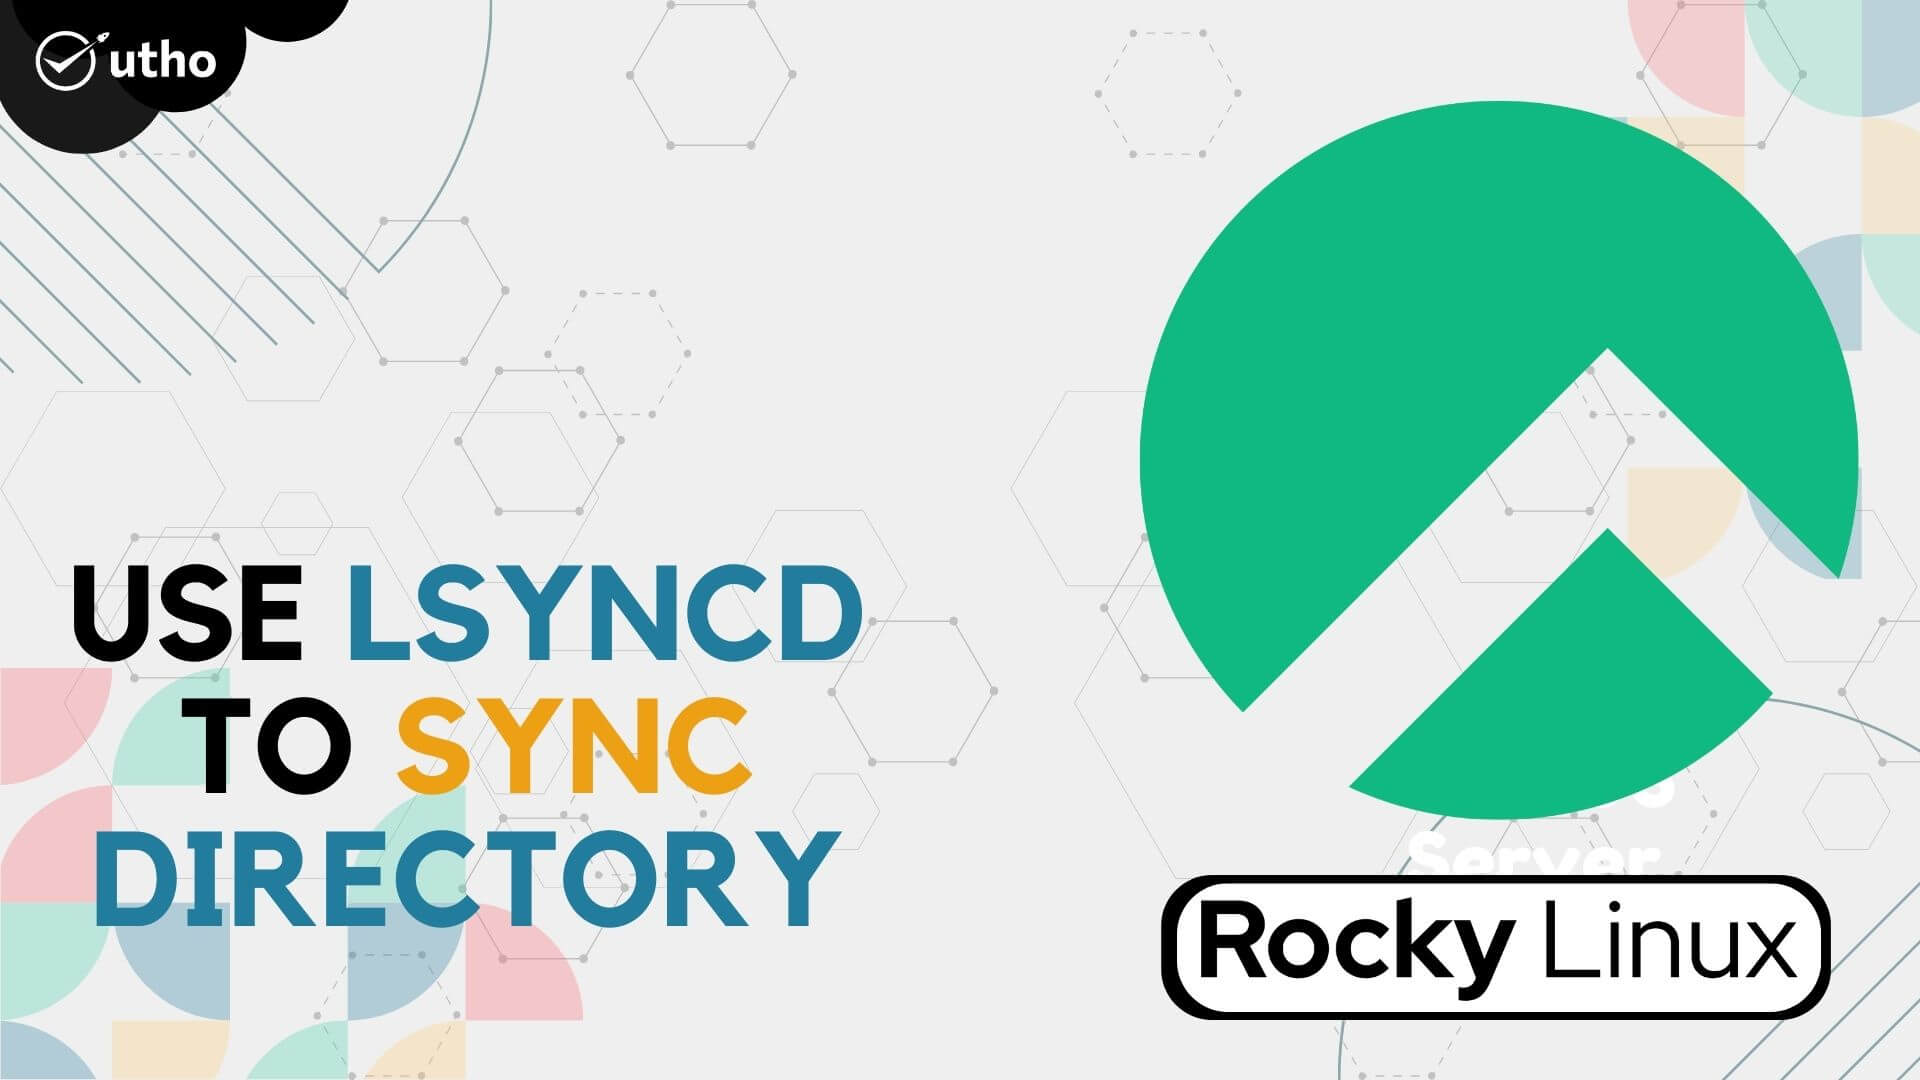 use lsyncd to sync directory on RockyLinux